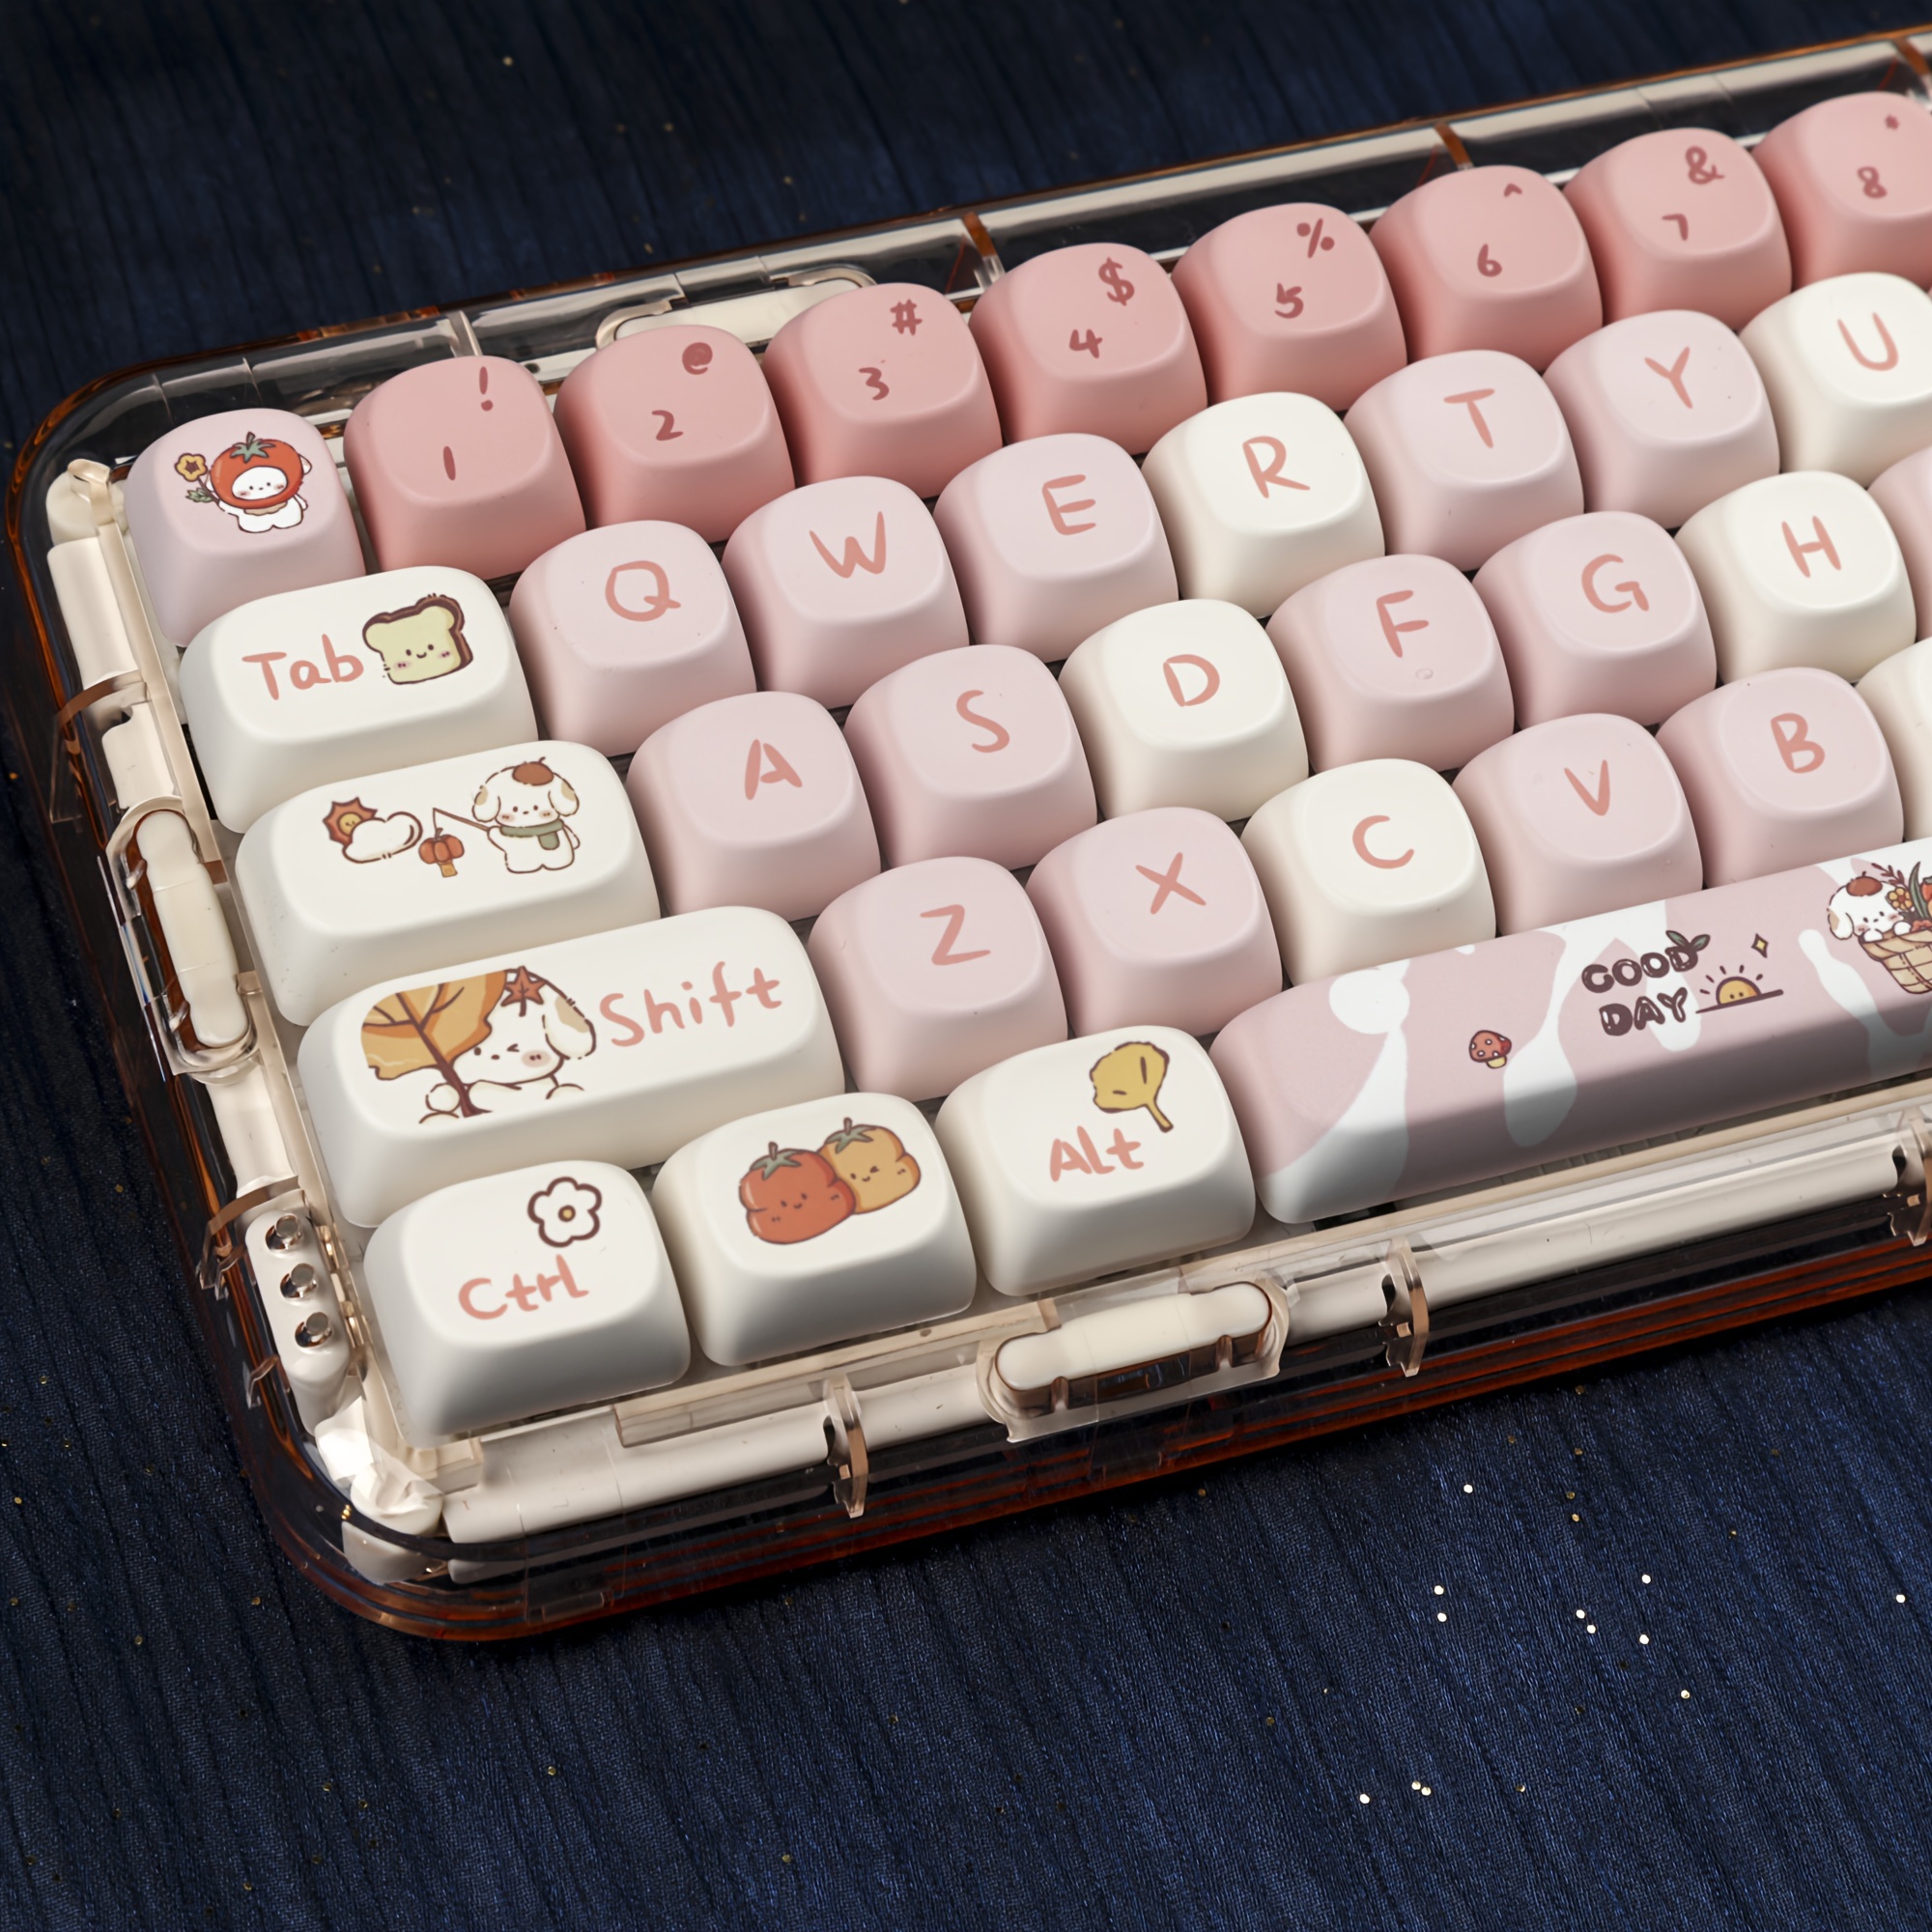 

[only Keycaps]140+ Keys Autumn Puppy Moa Profile Keycap Pbt Keycap Set Fit For 61/64/87/104/108 Gateron Kailh Cherry Mx Switch Ansi Layout Mechanical Keyboard